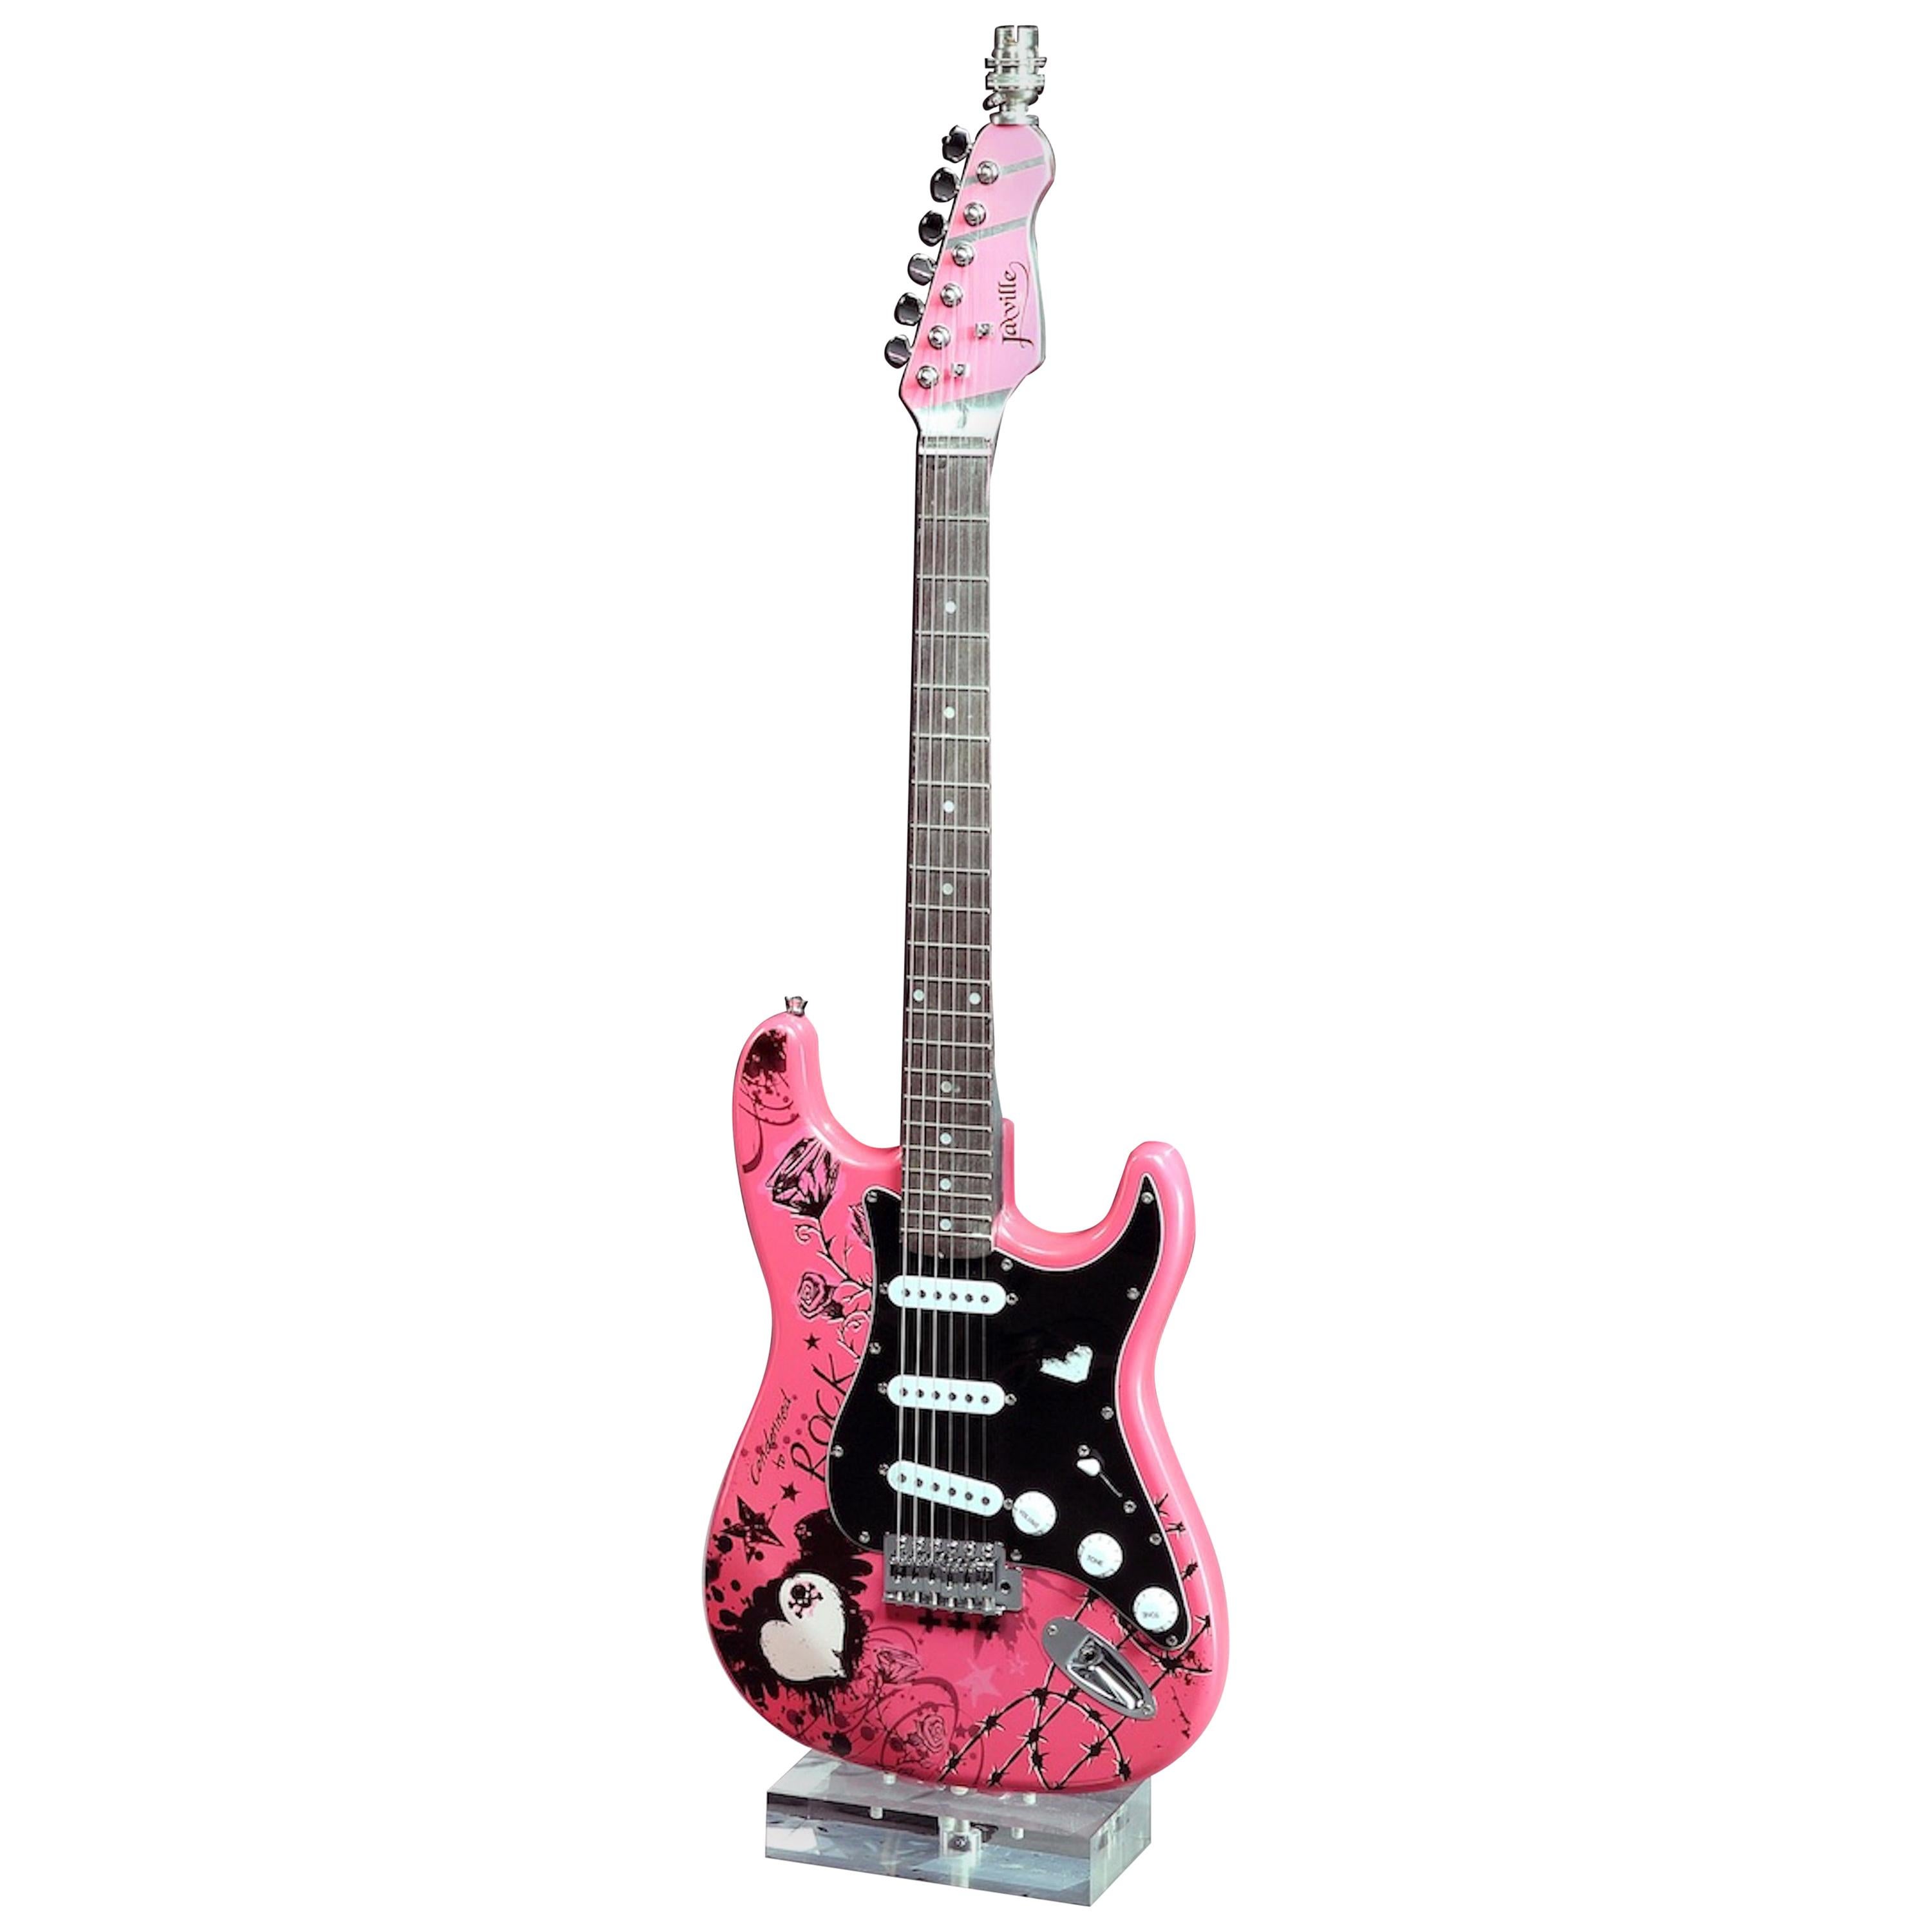 Lamp Guitar Electric Punk Bubble Gum Pink Condemned to Rock & Roll Chrome Maple For Sale